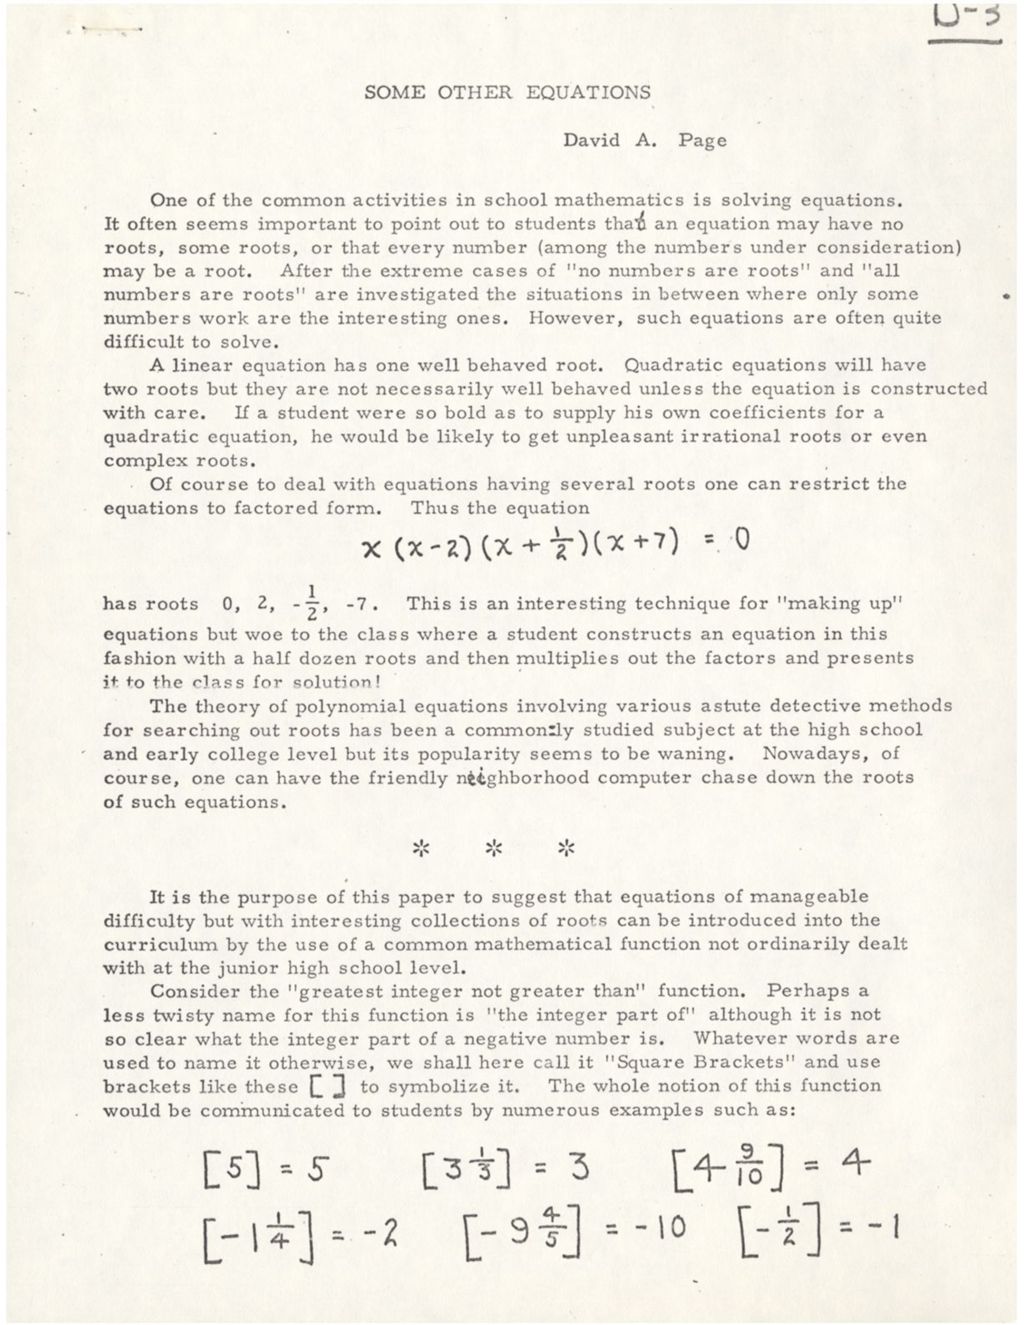 Miniature of Some Other Equations by David A. Page